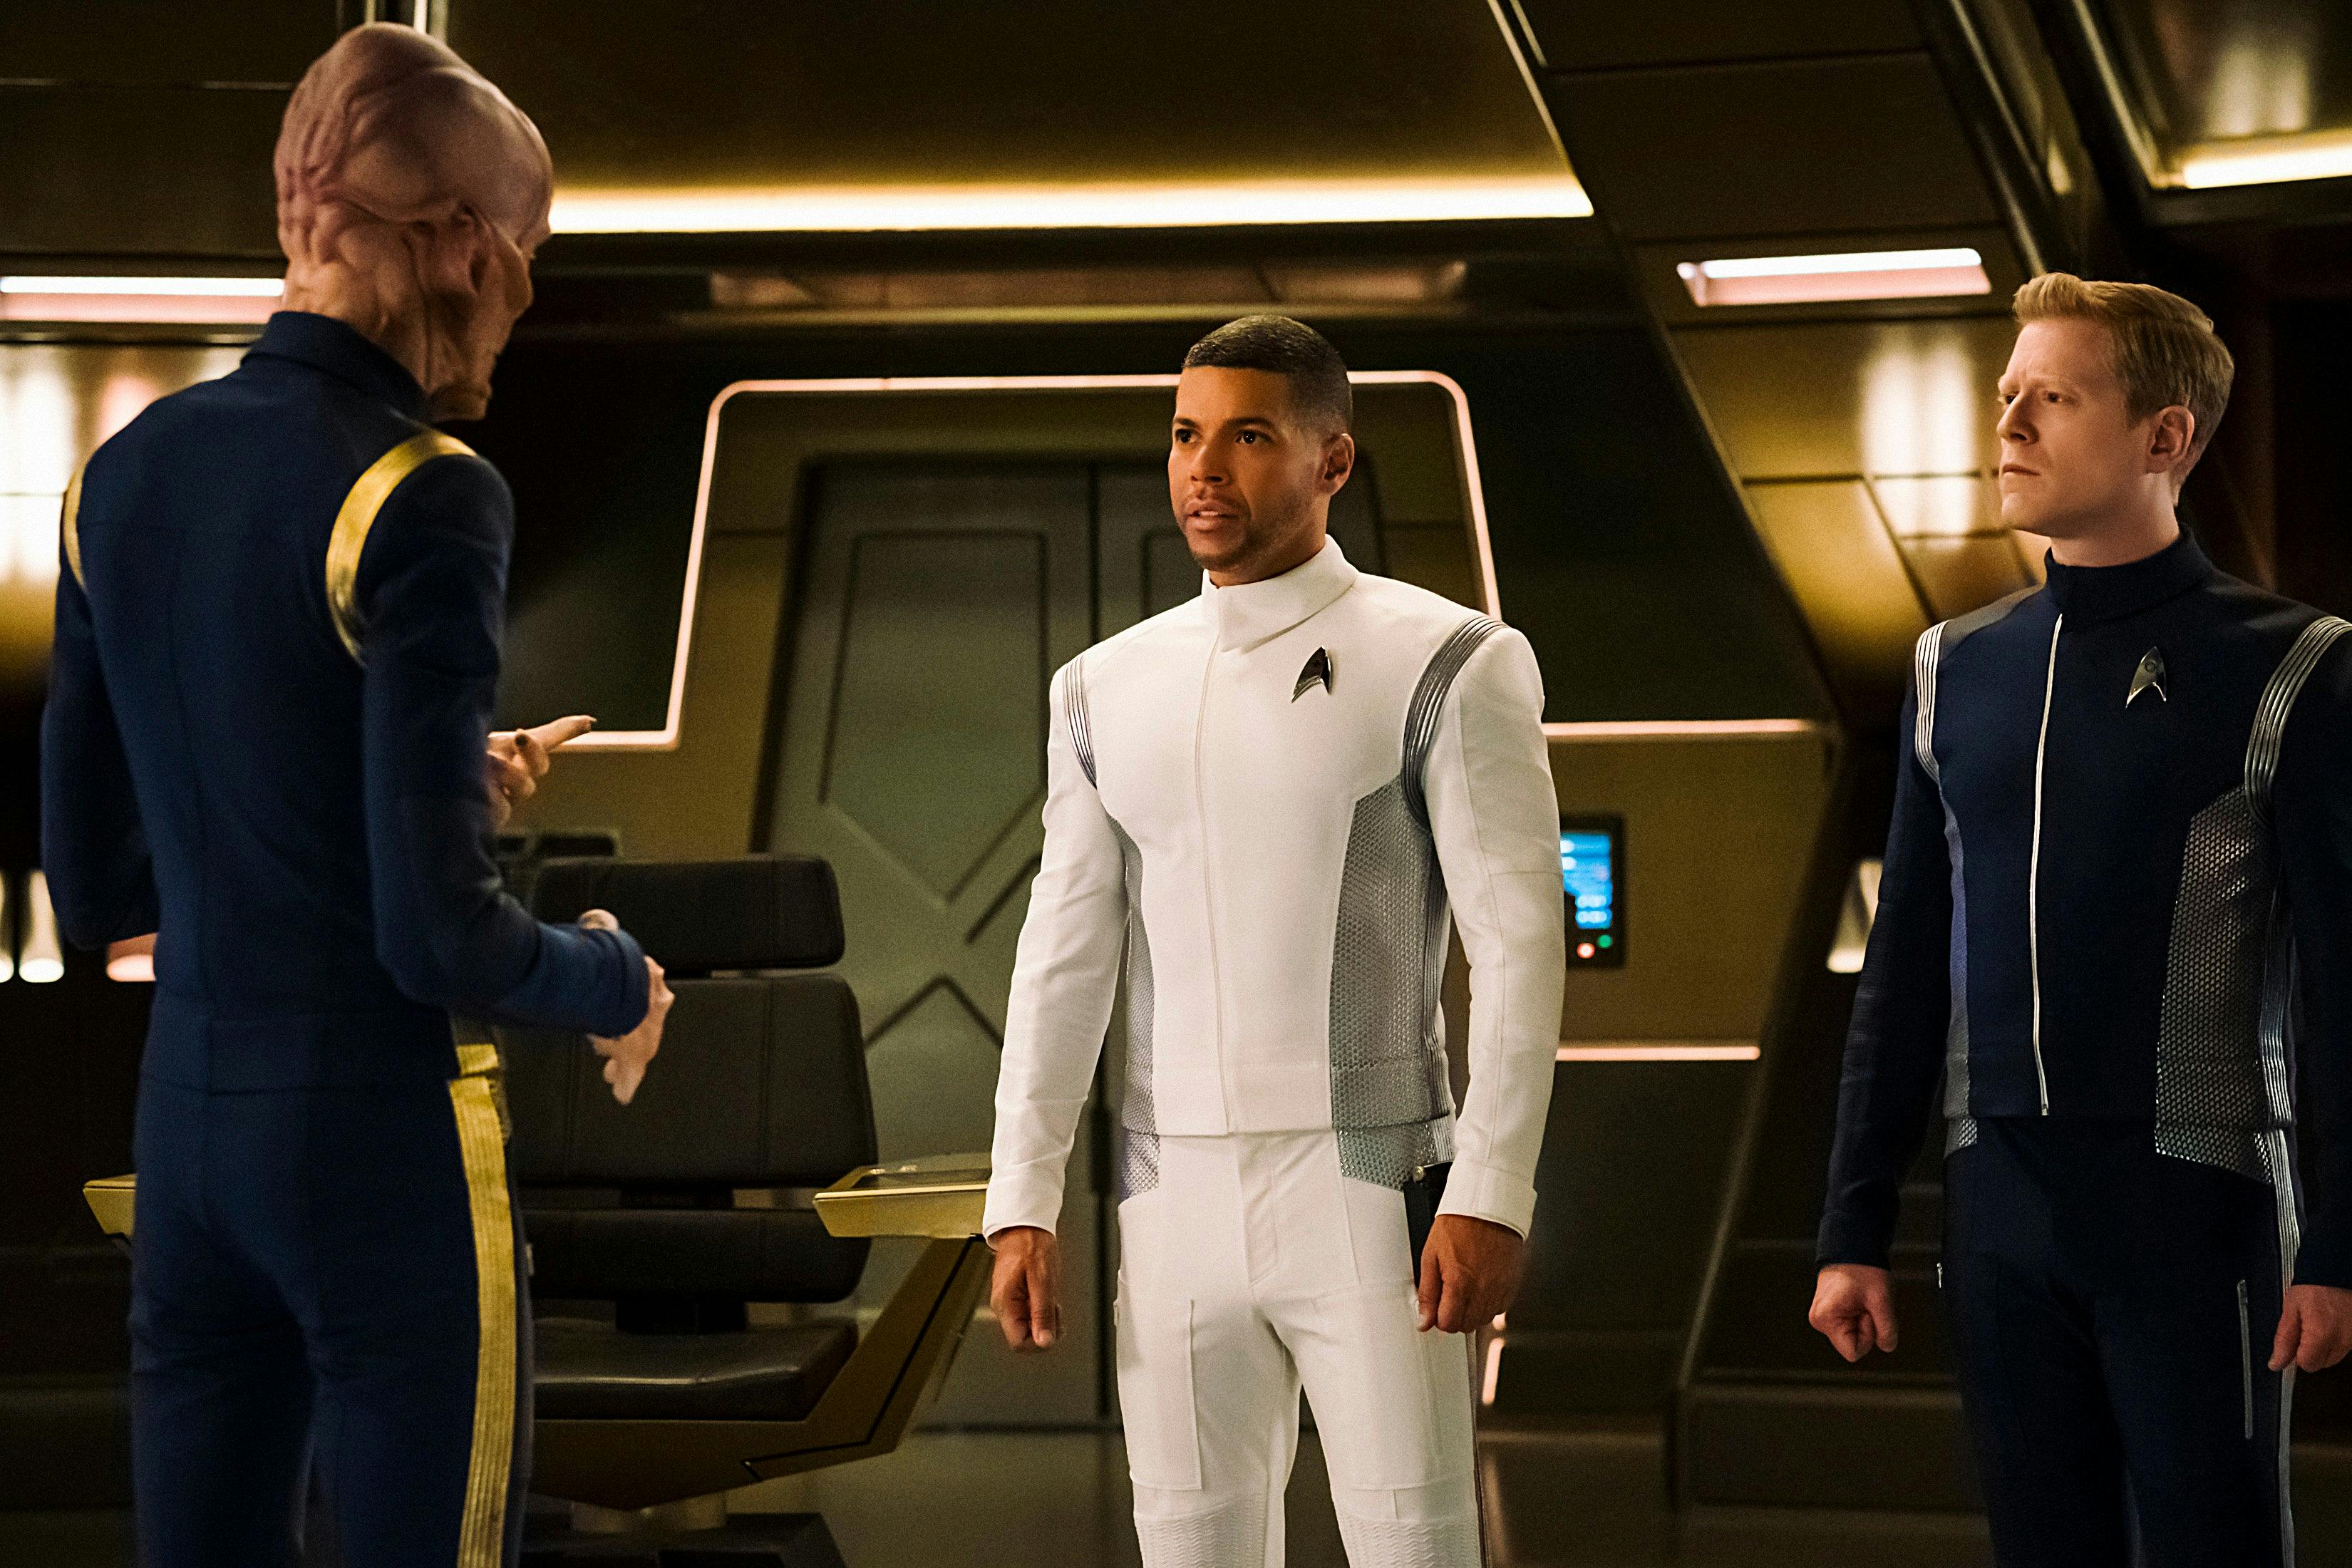 Culber and Stamets face acting captain Saru on the Bridge of the Discovery